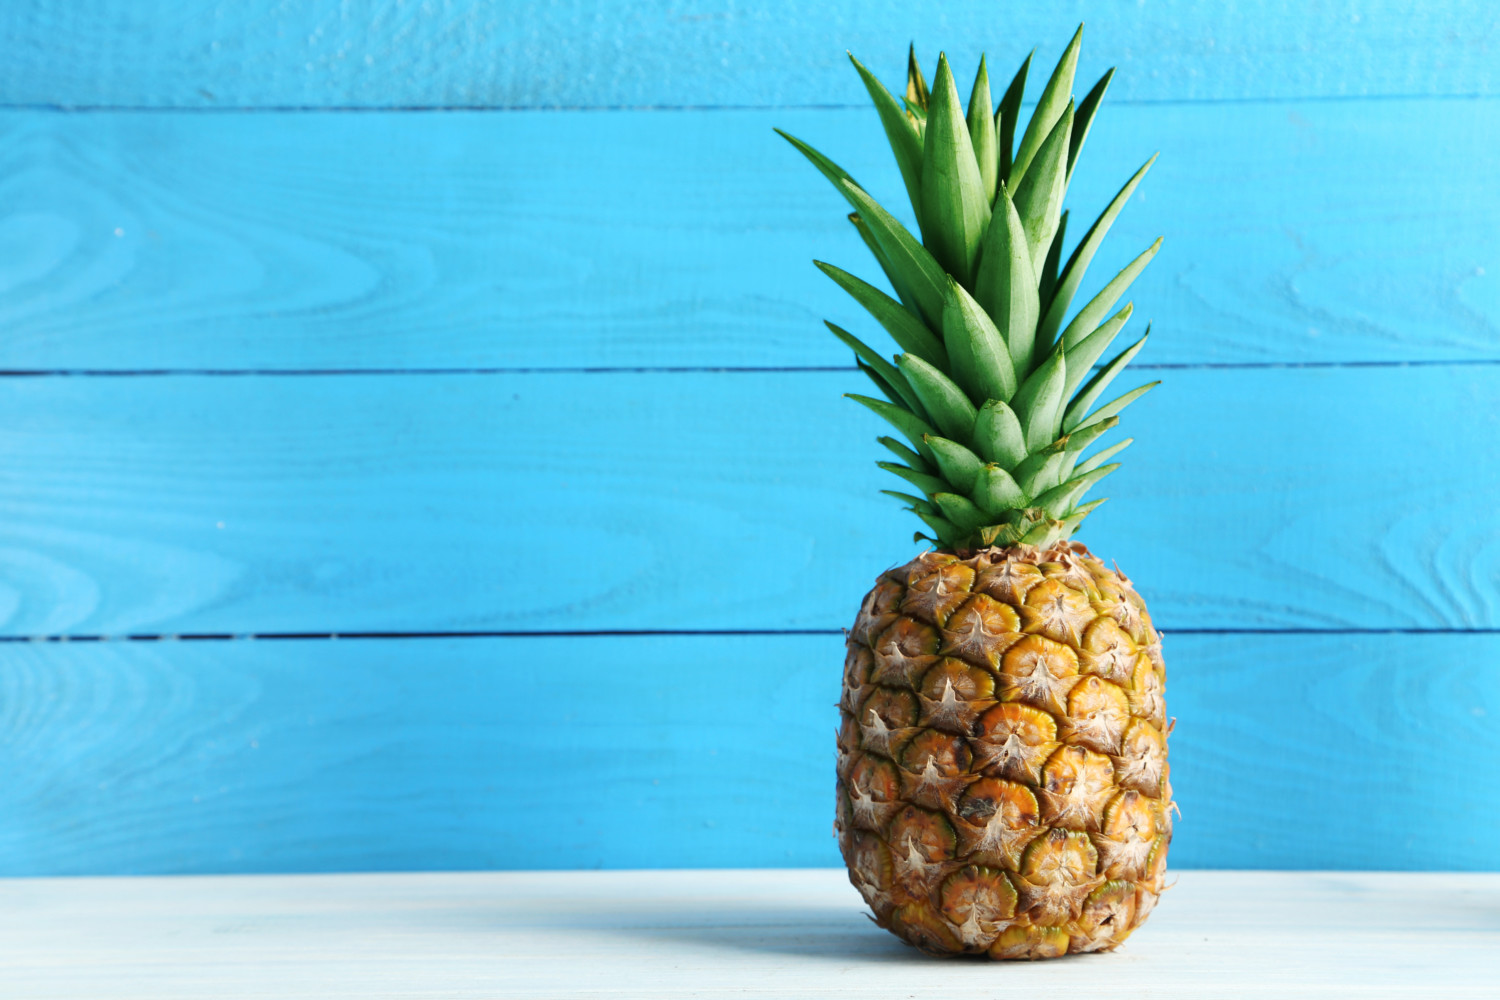 Pineapple on blue background